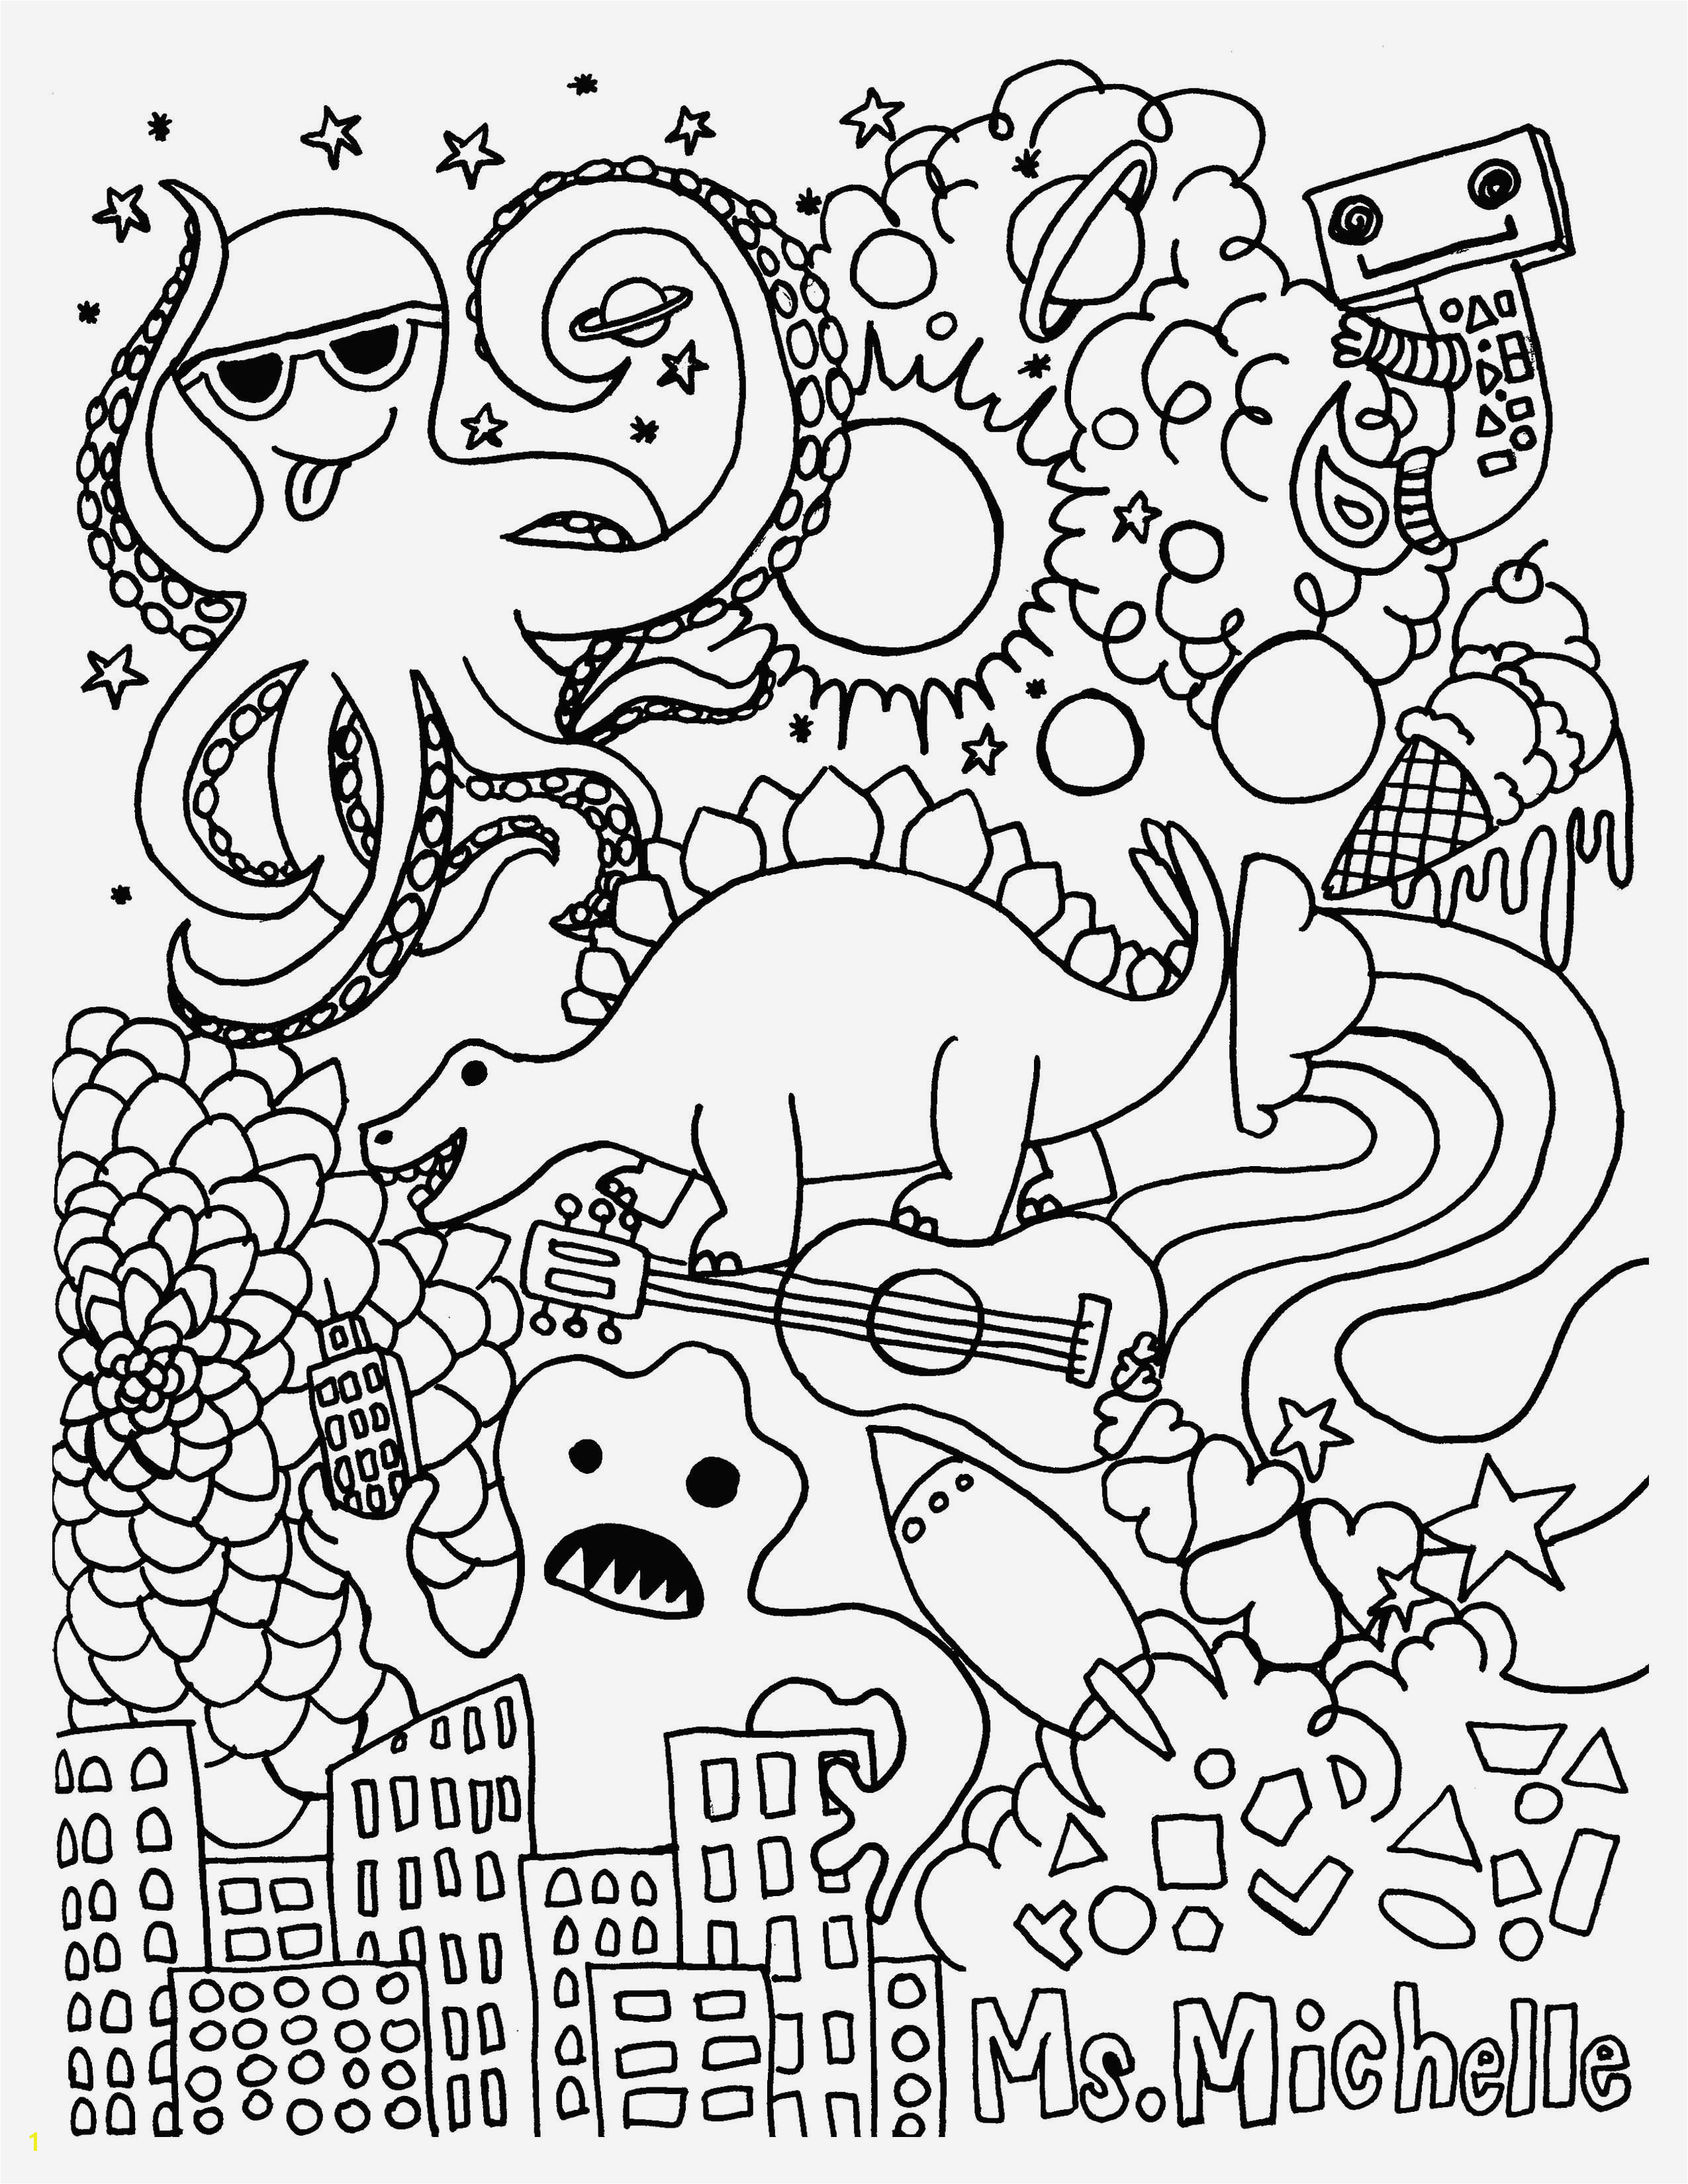 Smoky Mountain Coloring Pages Smoky Mountain Coloring Pages Unique 20 Superb Animals In Great